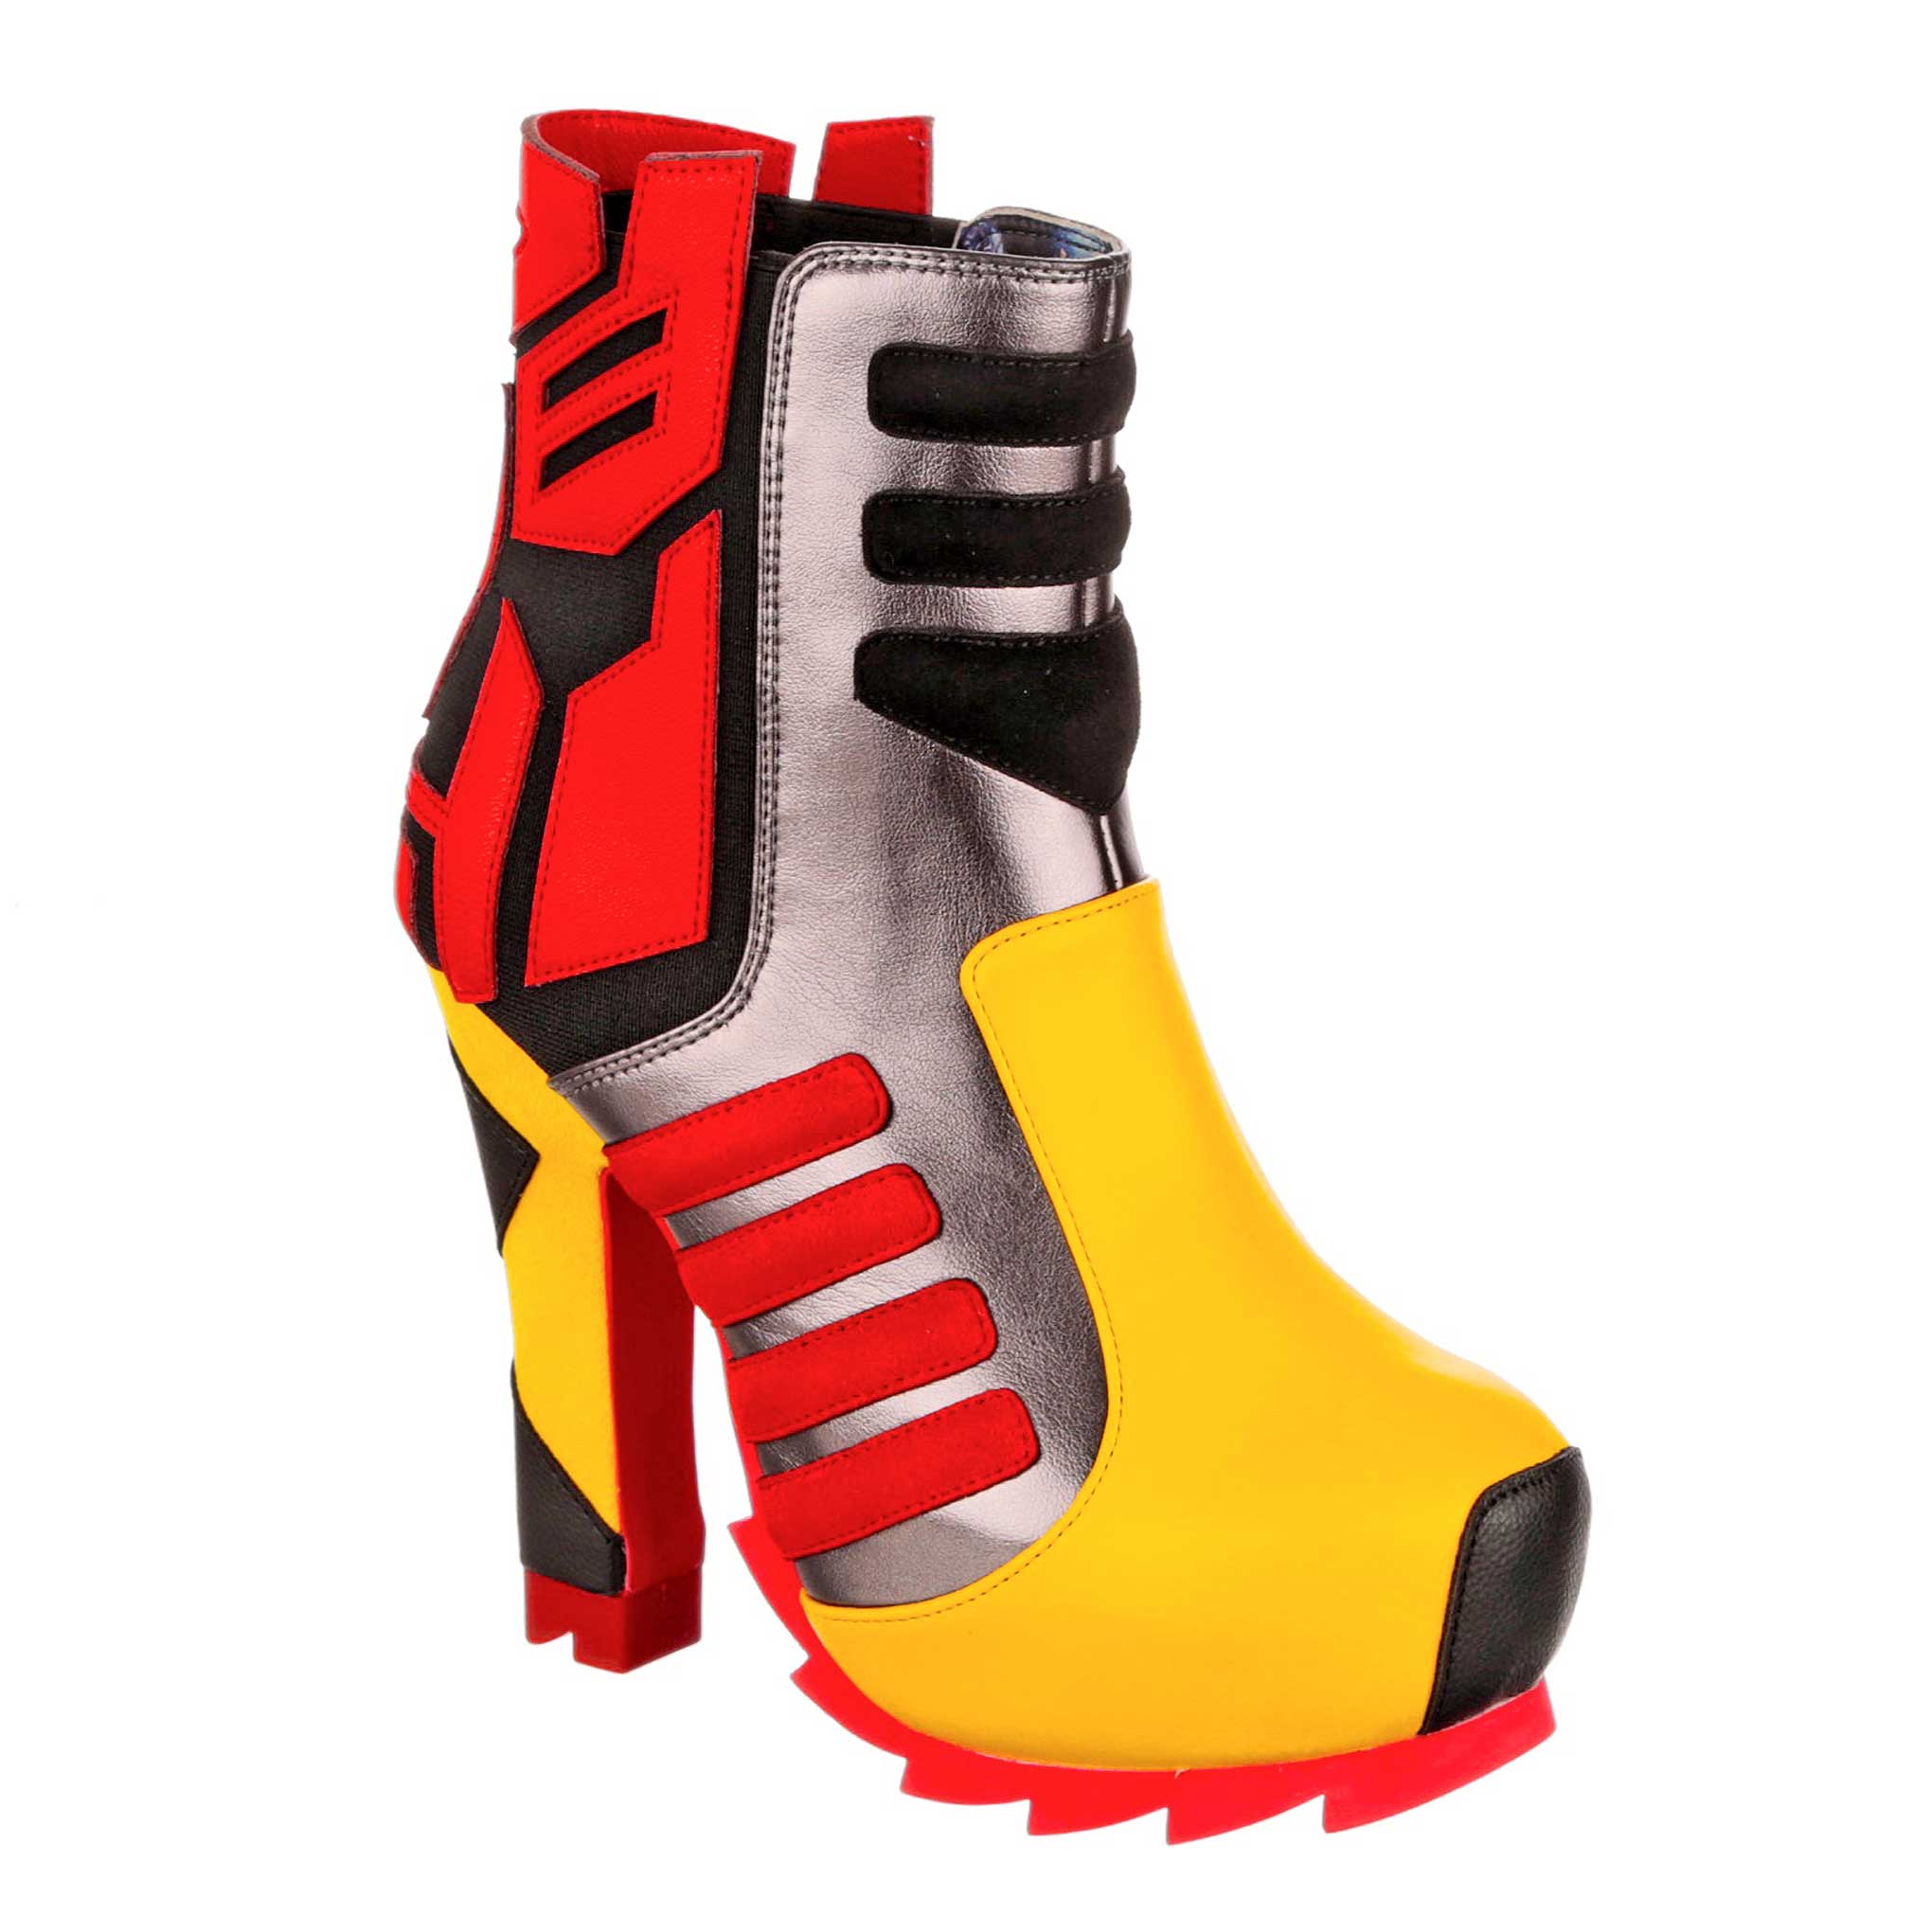 Red and yellow high heel ankle boots with bold geometric patterns and a red chunky platform. Transformers themed motorbike boots with a large red Autobot logo that wraps around the ankle. 